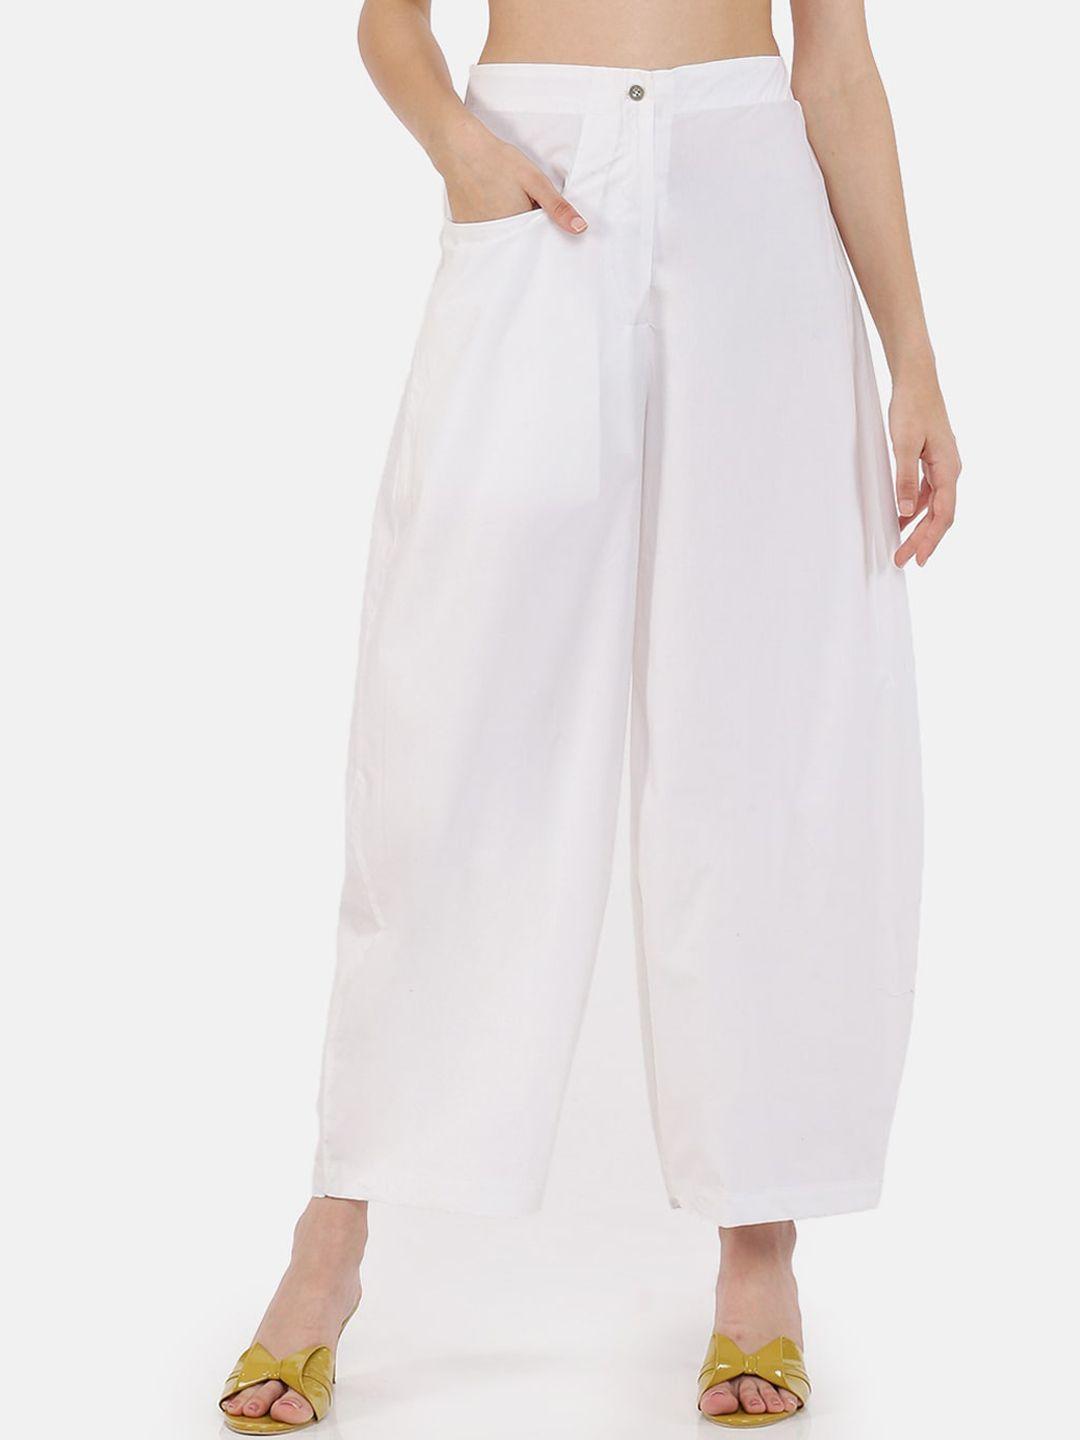 grass by gitika goyal women white classic loose fit high-rise culottes trousers